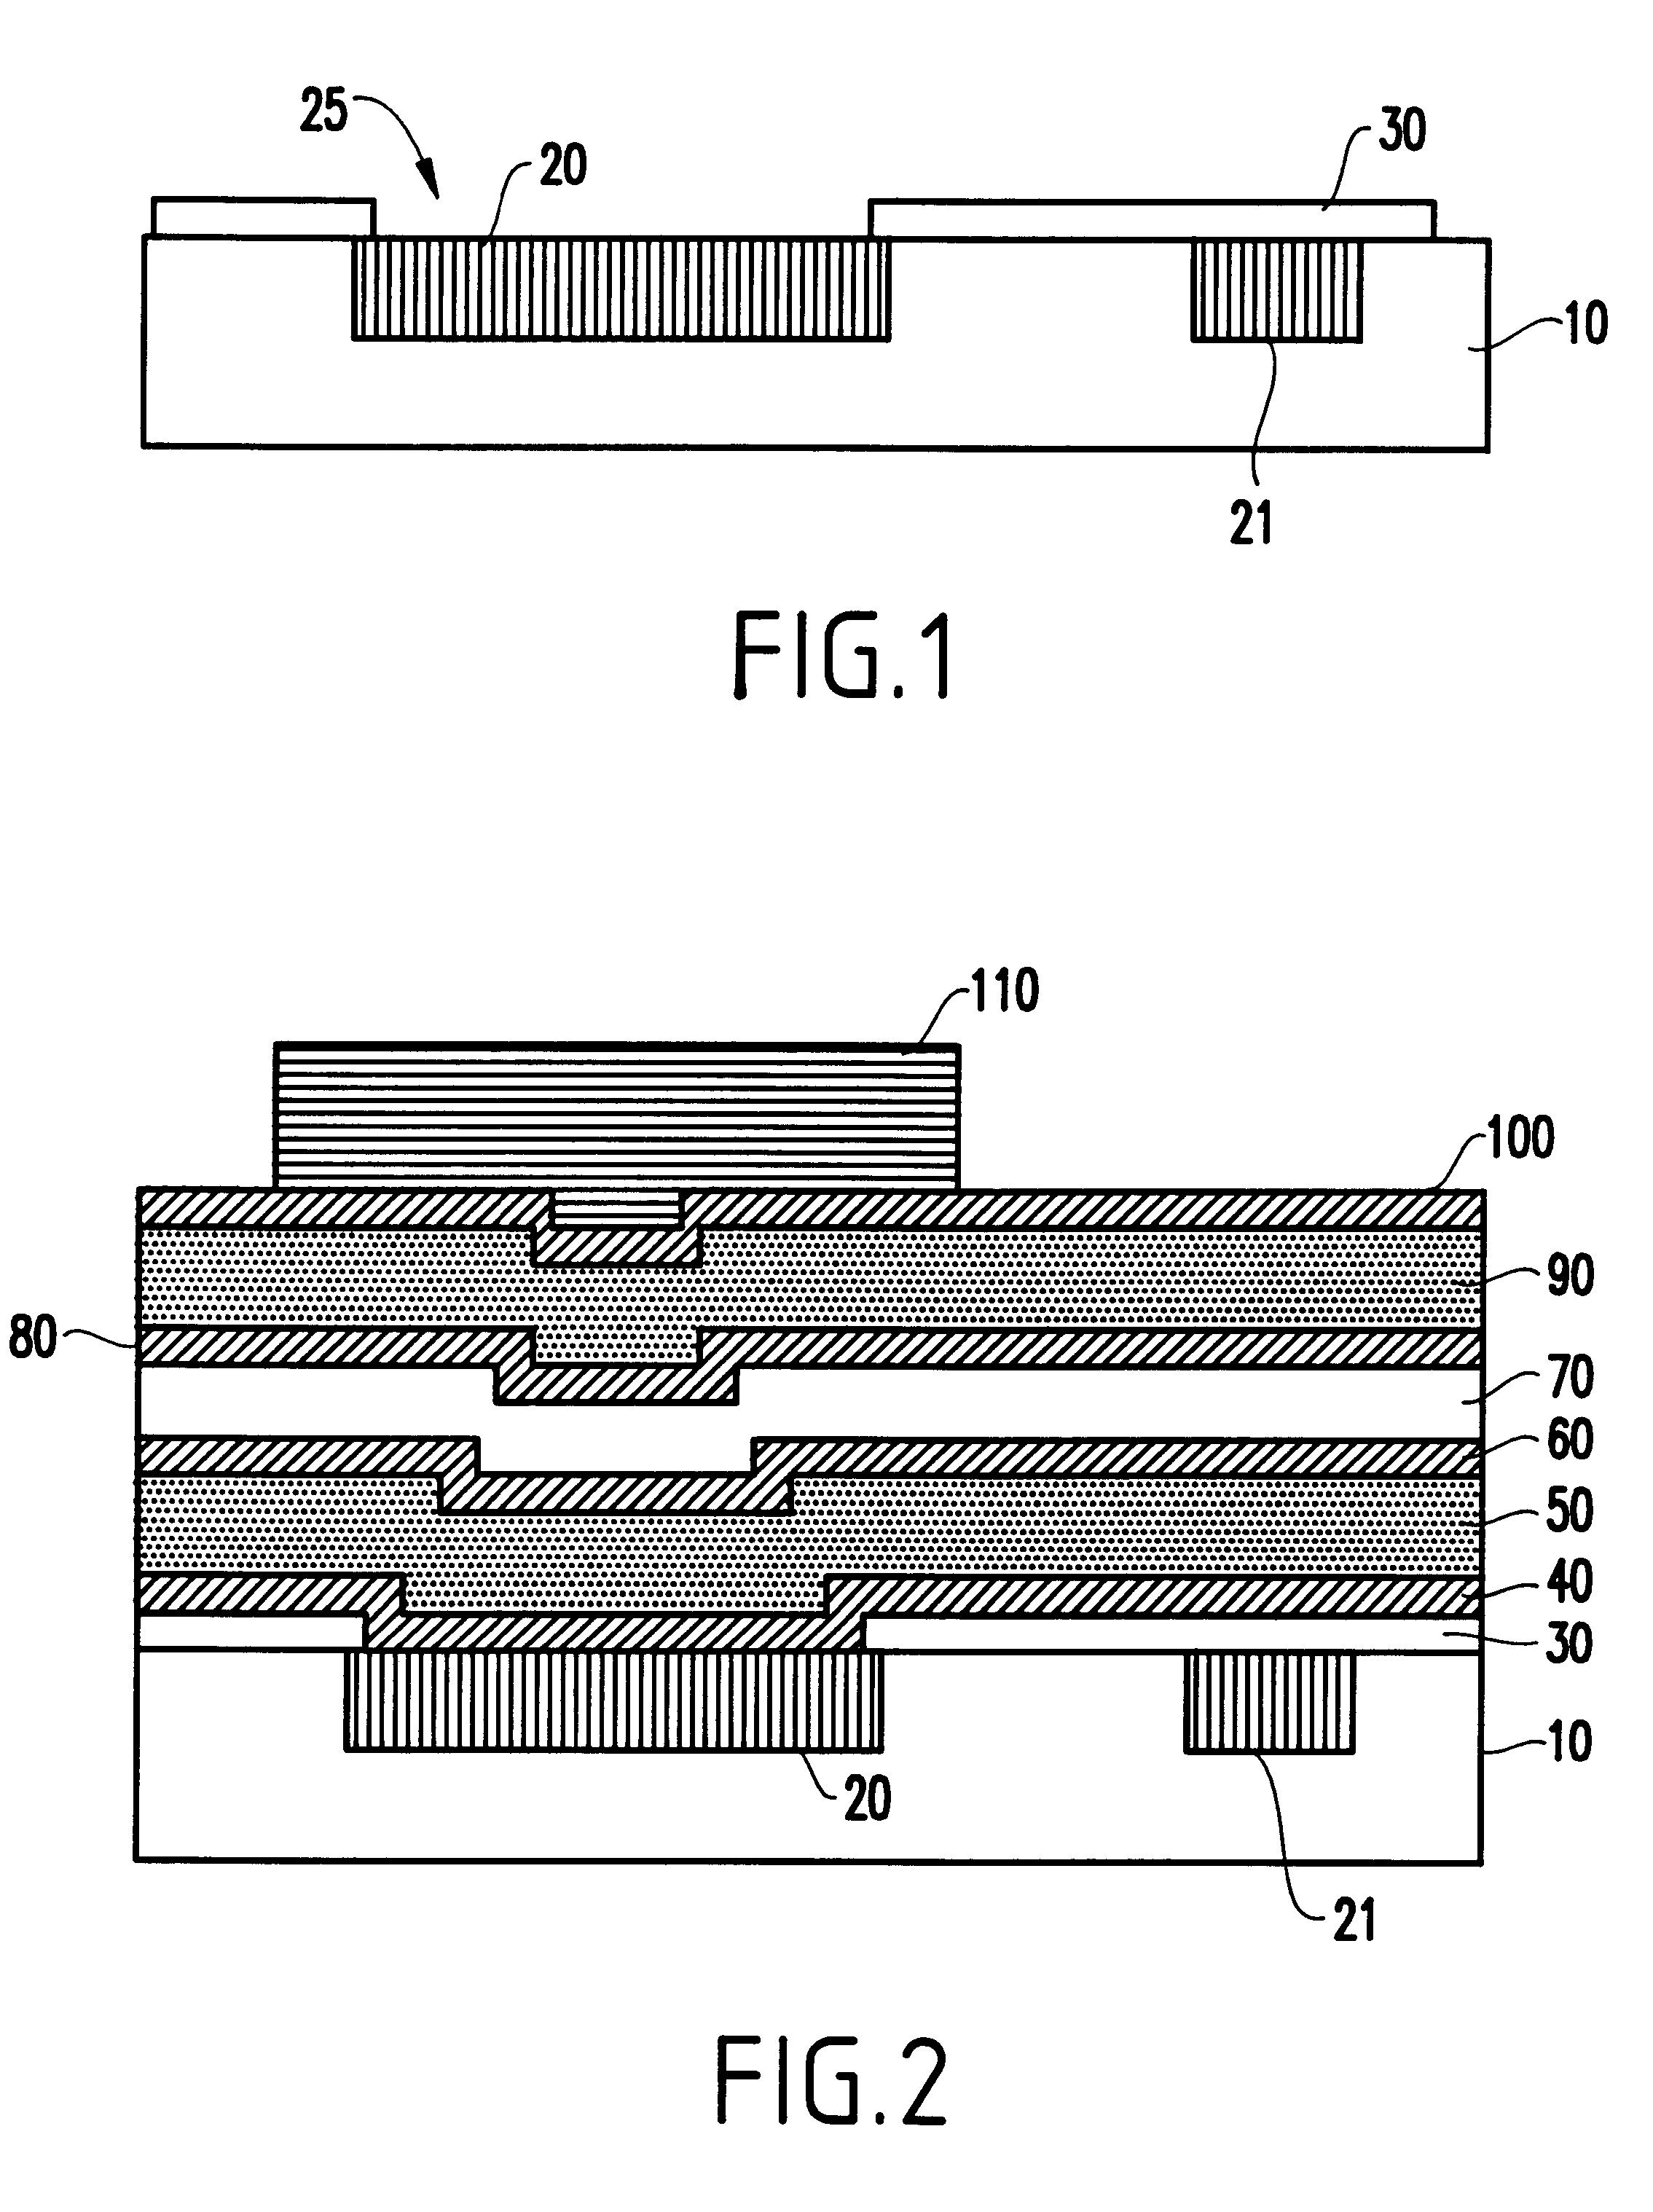 Metal-insulator-metal capacitor for copper damascene process and method of forming the same